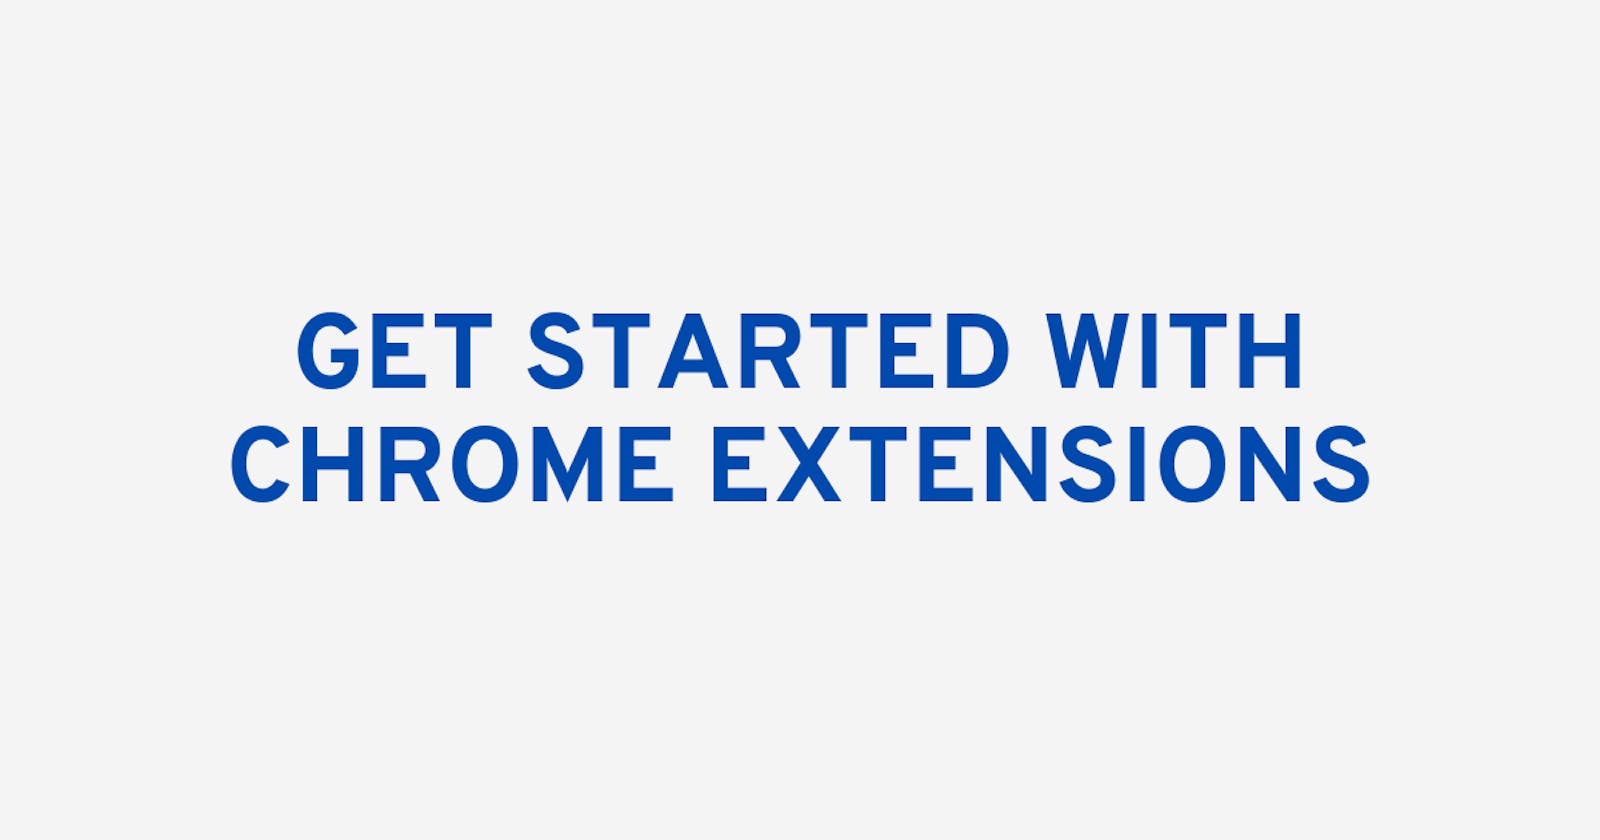 Learn how to create a Simple Chrome Extension